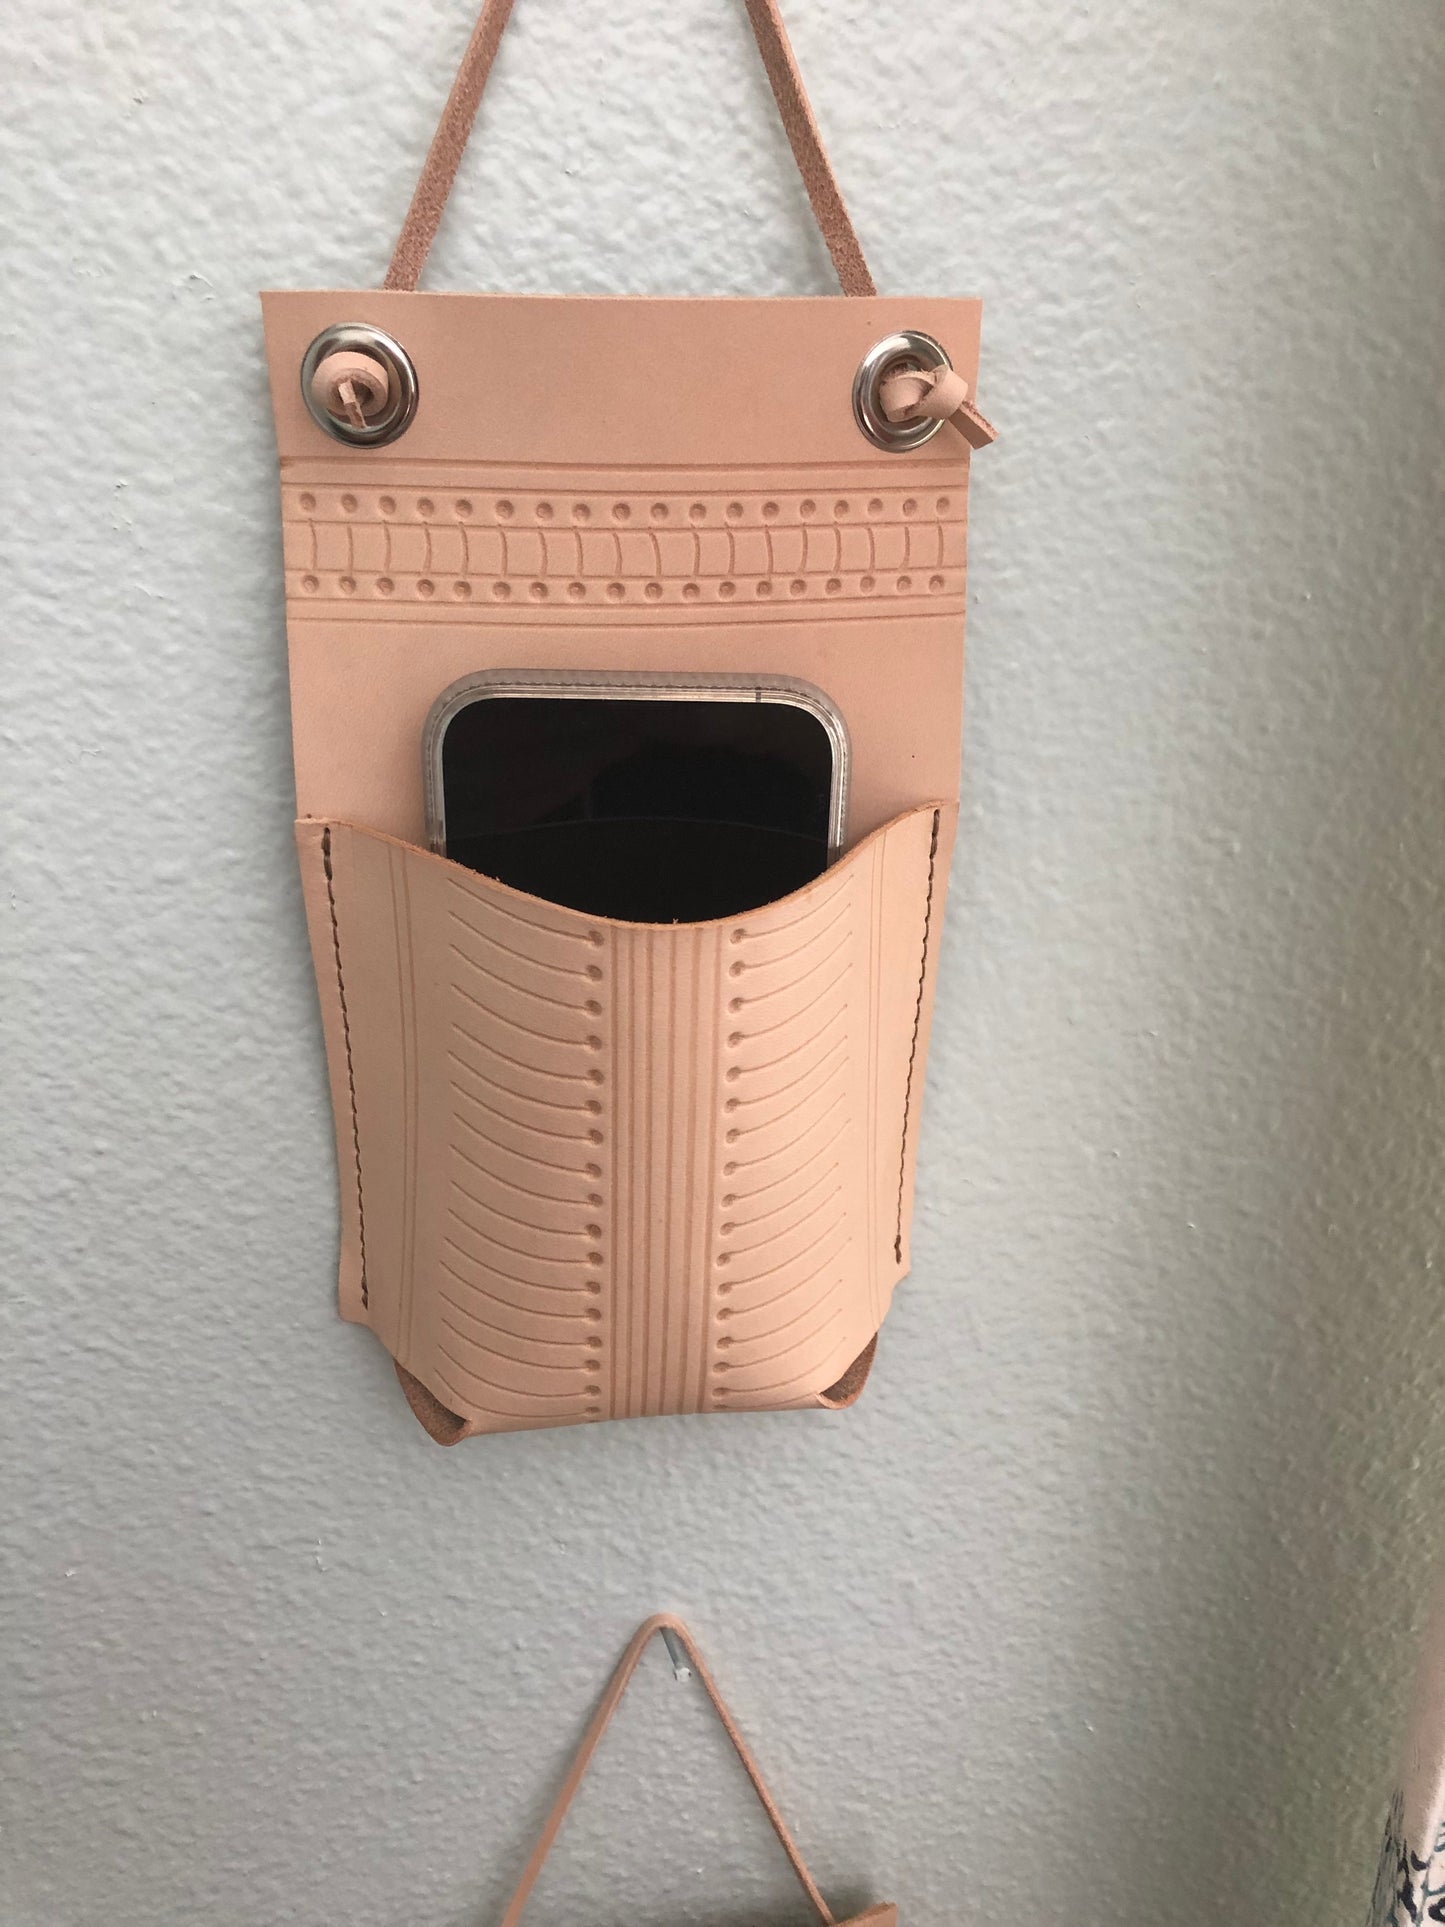 Patterned Leather Wall Pocket | Hanging Leather Wall Caddy | Hanging Storage